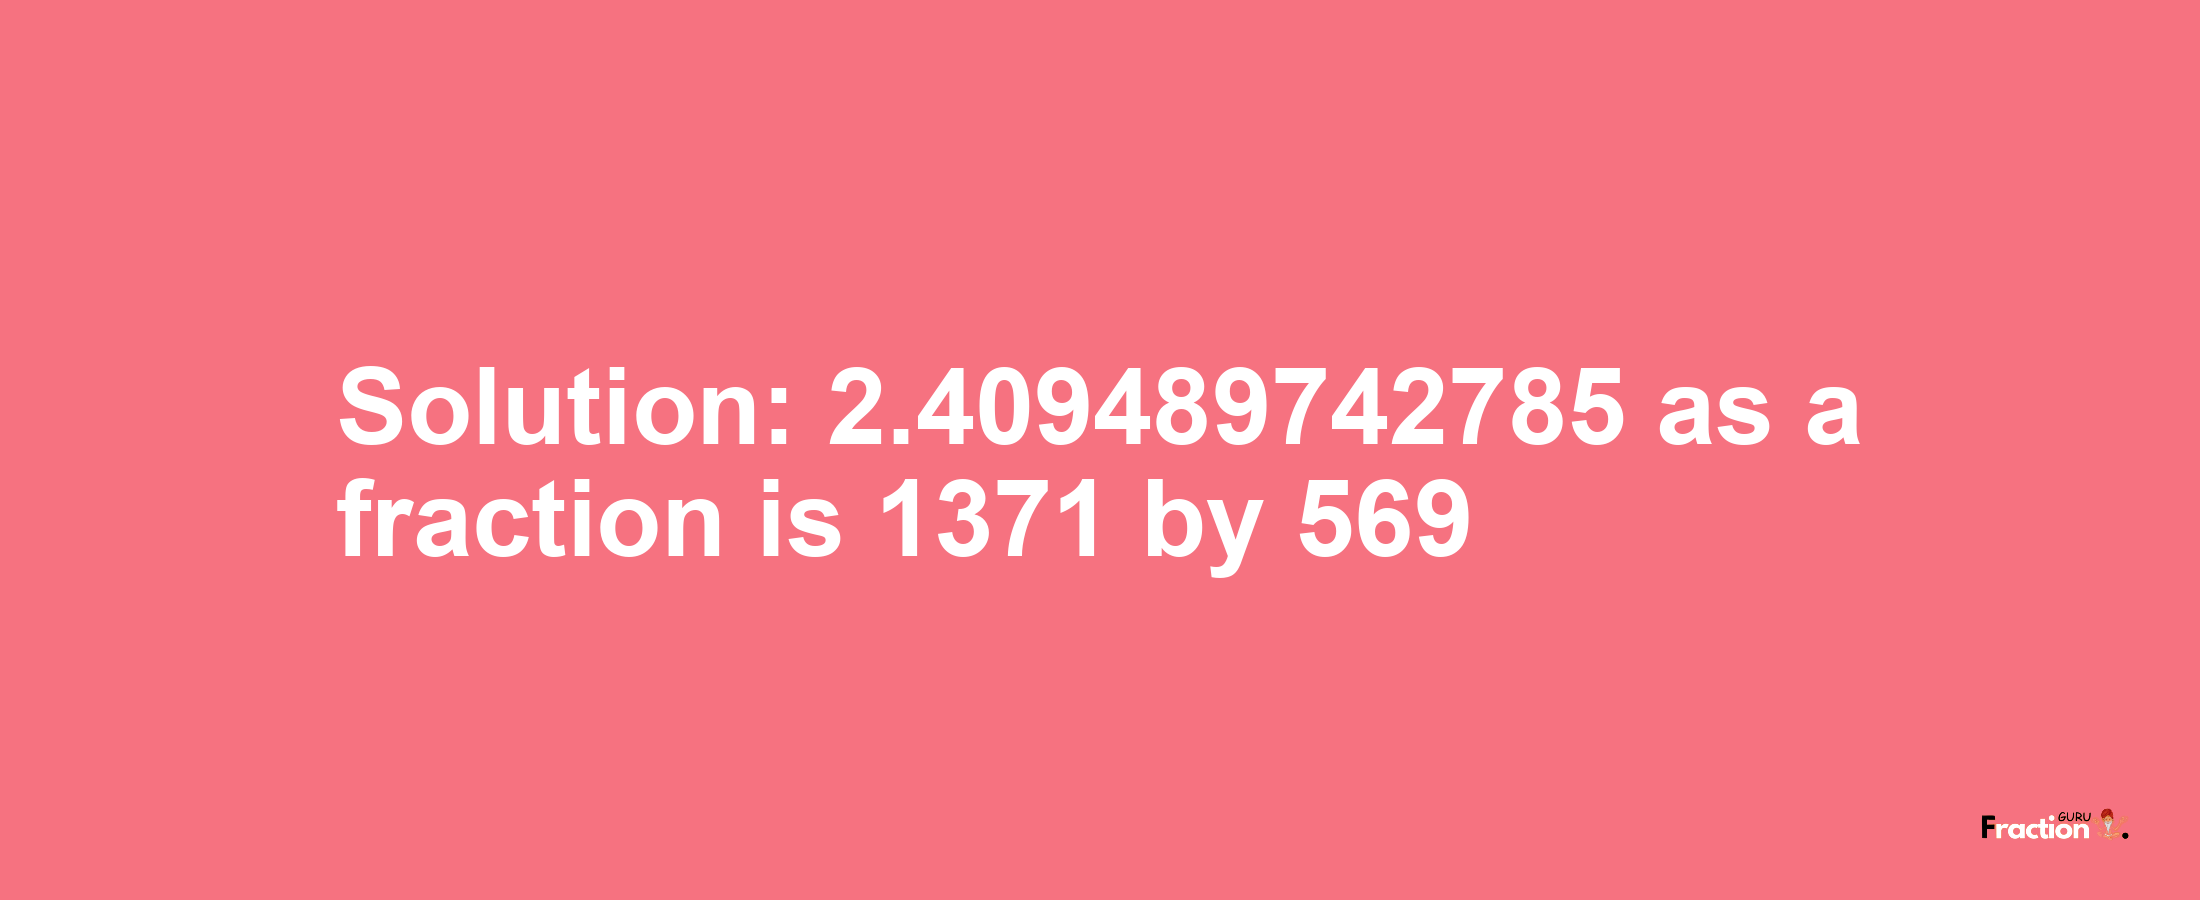 Solution:2.409489742785 as a fraction is 1371/569